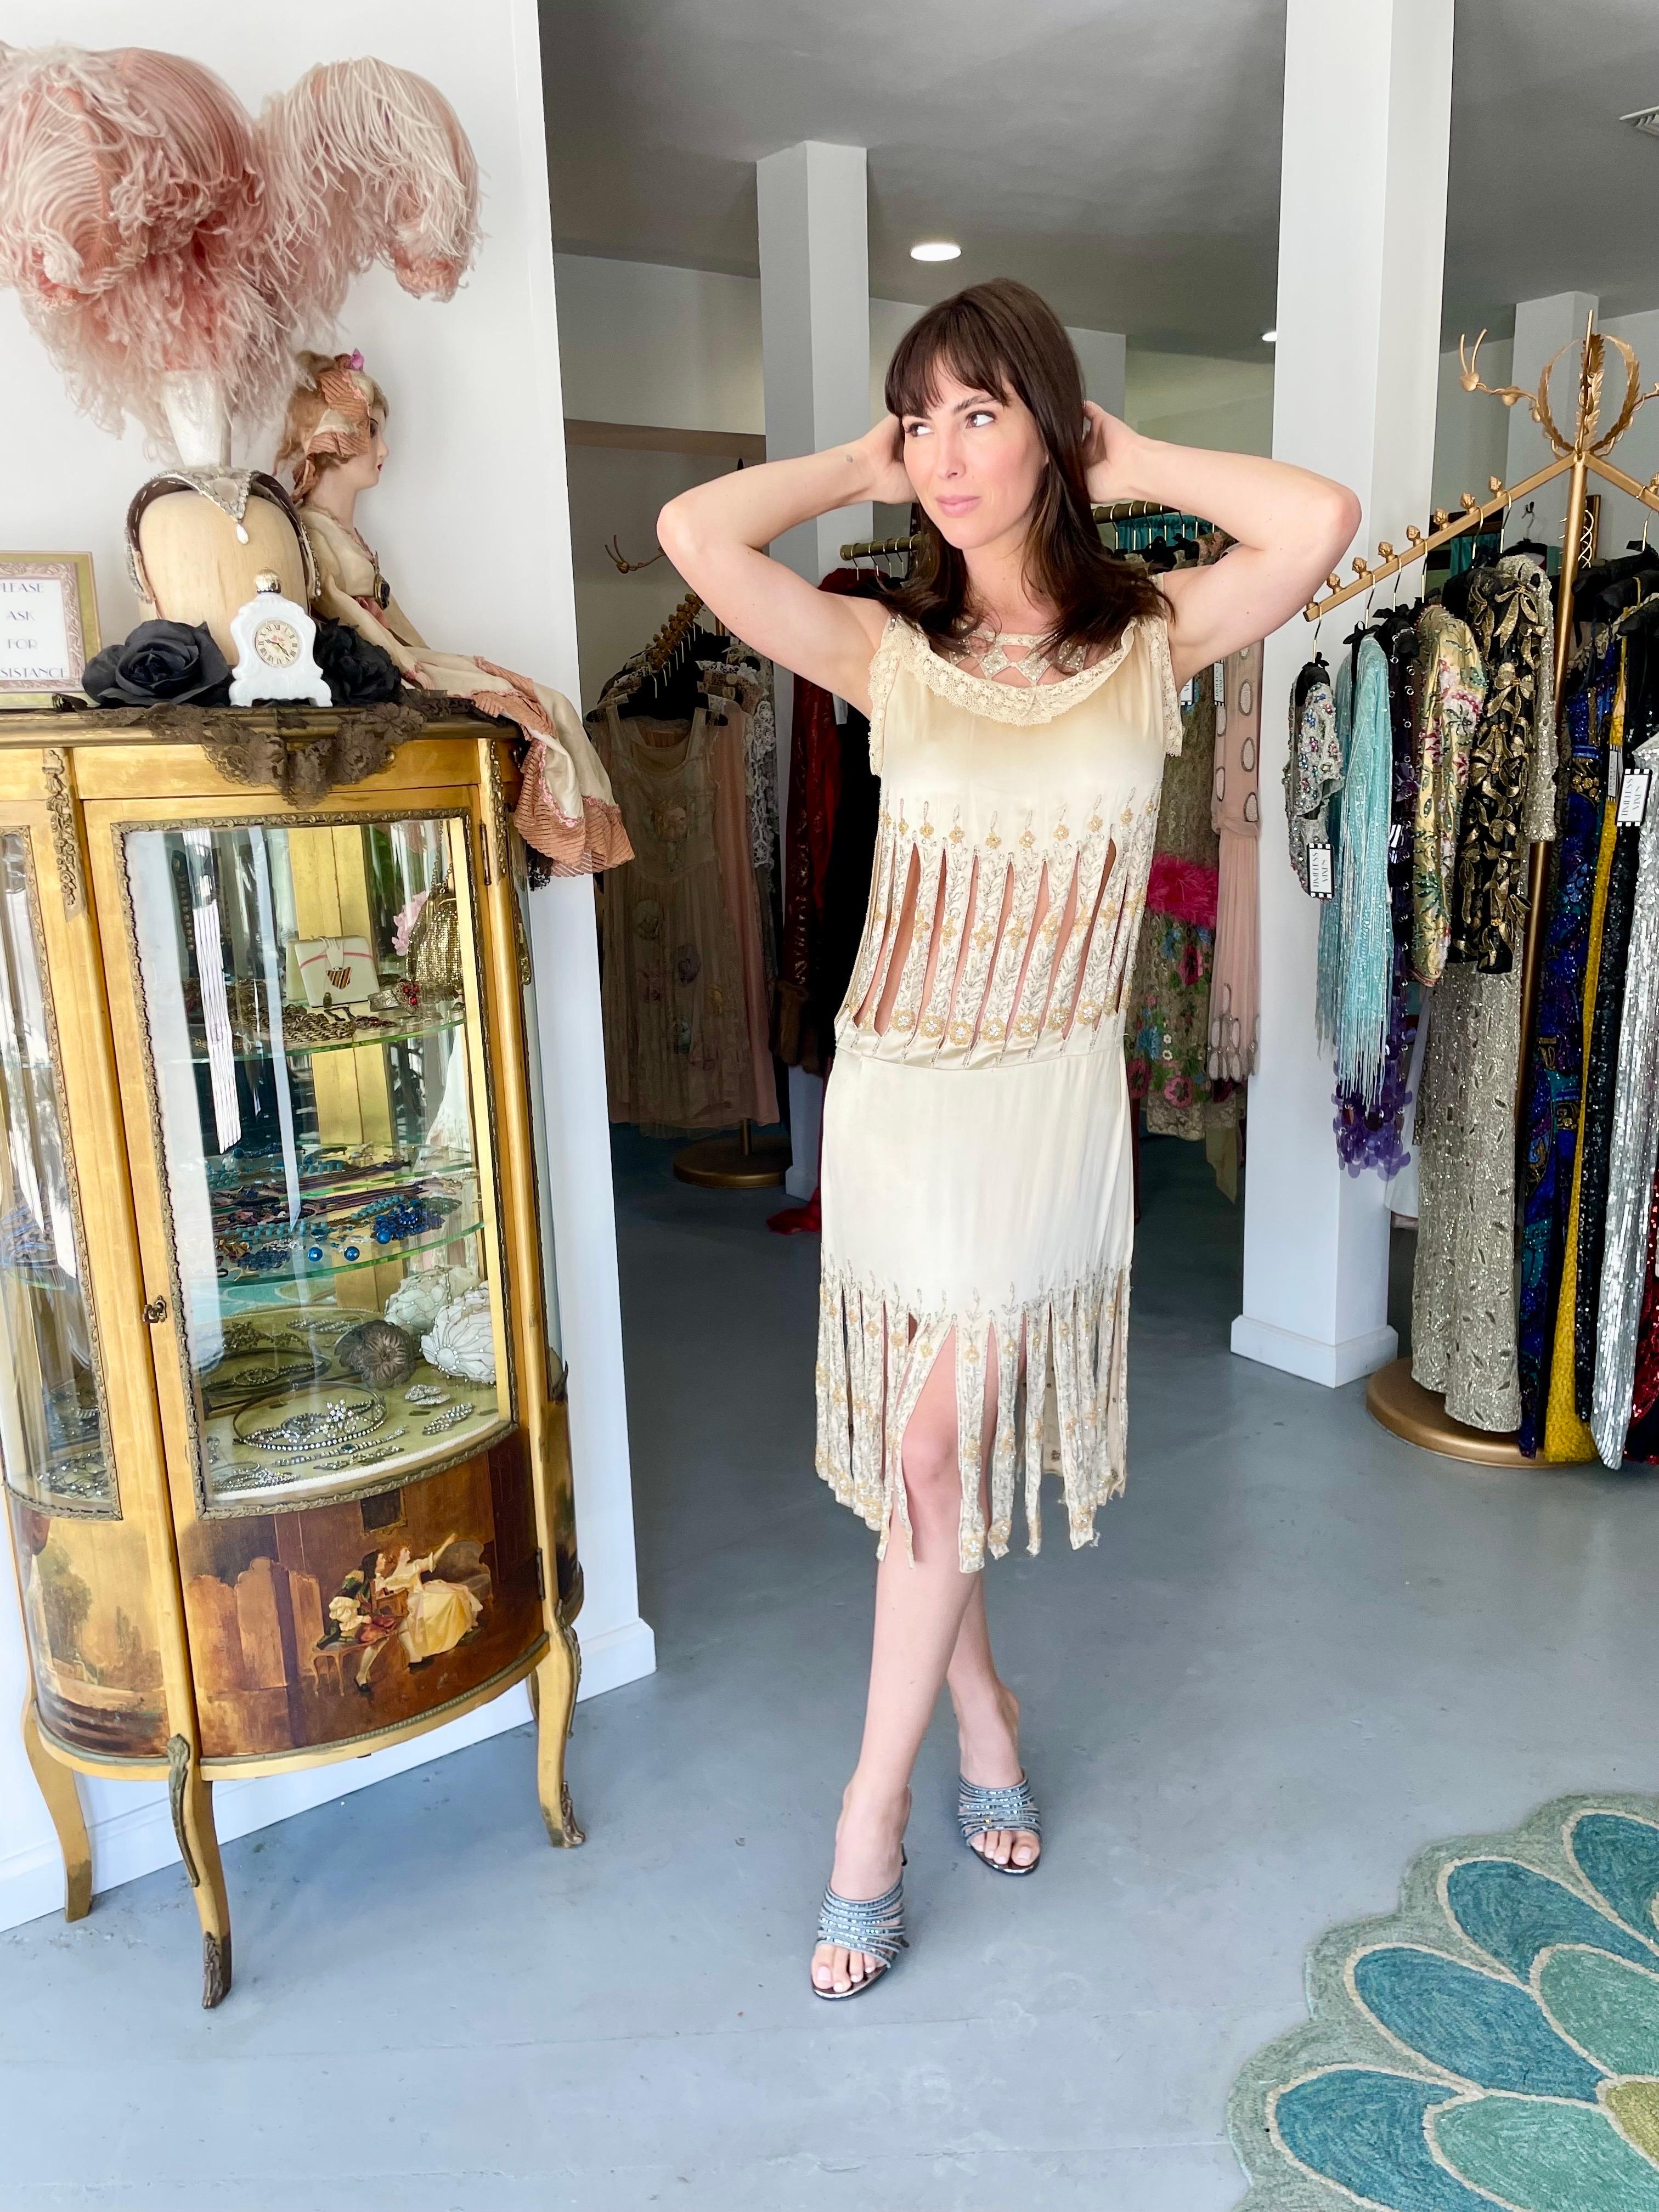 Untouched by time, this incredibly rare 1920's candlelight cream silk dance dress still casts its magical spell. This exceptional Art Deco beauty is fashioned in luxurious mid-weight silk satin that has been lavishly embellished with hundreds of